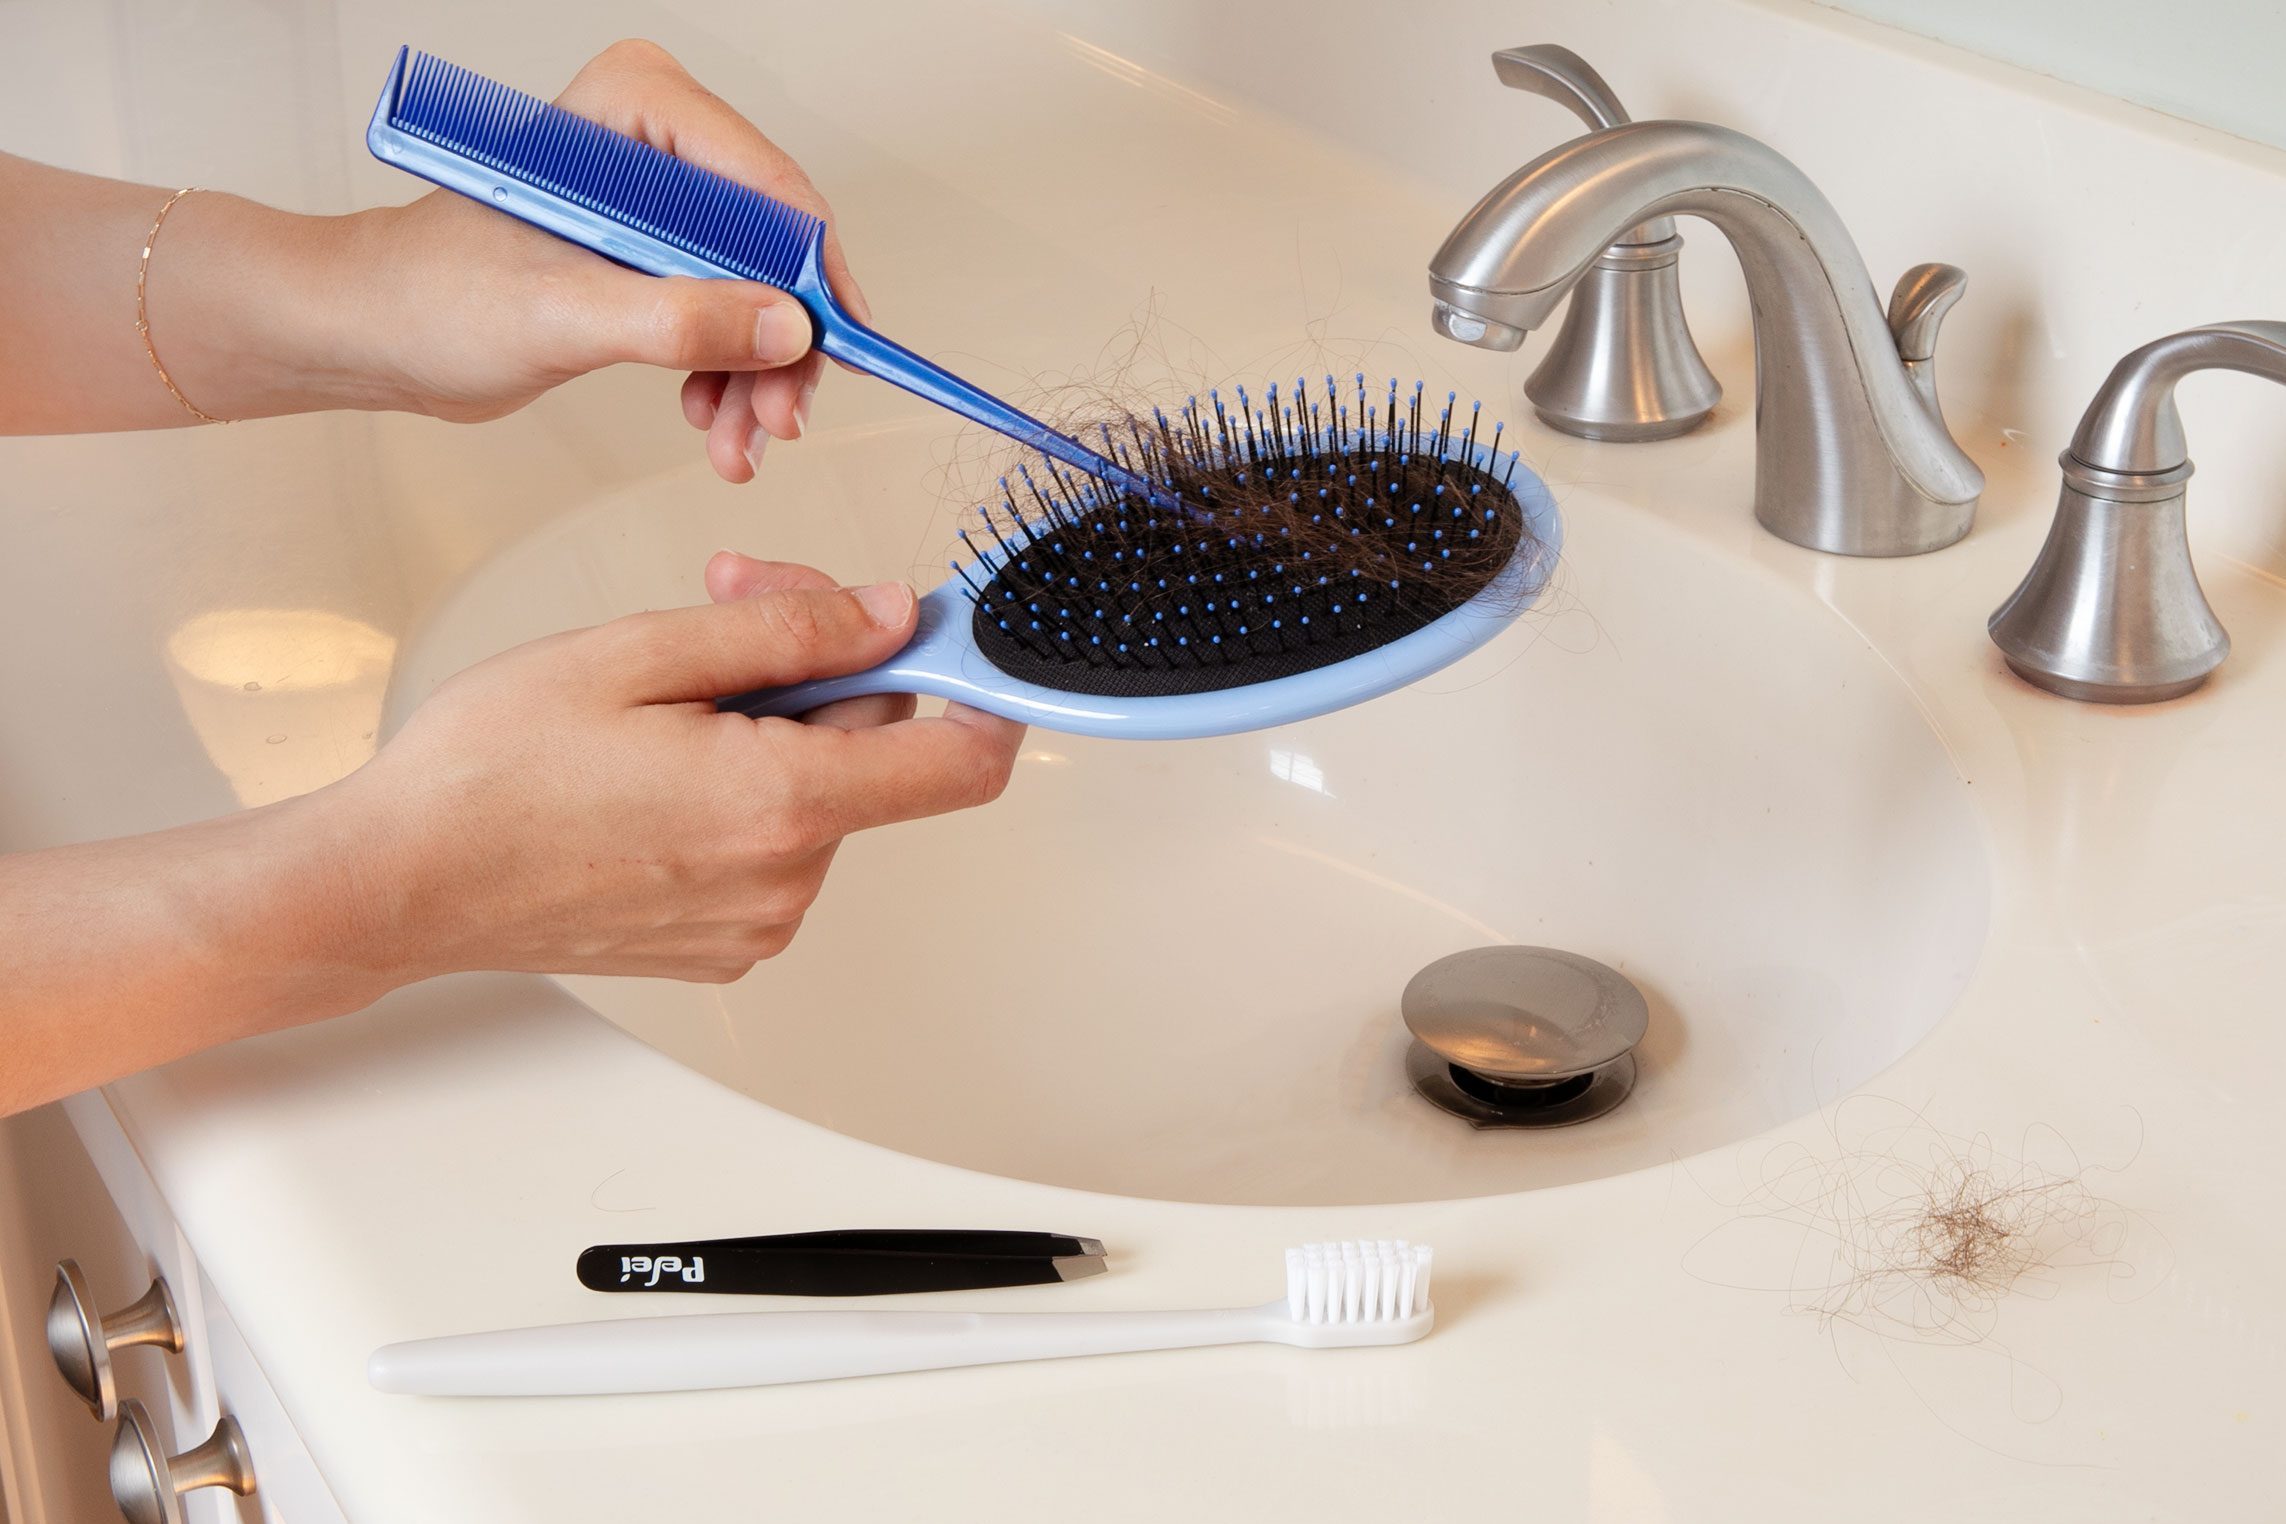 https://www.rd.com/wp-content/uploads/2023/02/20230316-Makeup-brush-cleaning-AD-0035-e1679514348659.jpg?fit=680%2C454